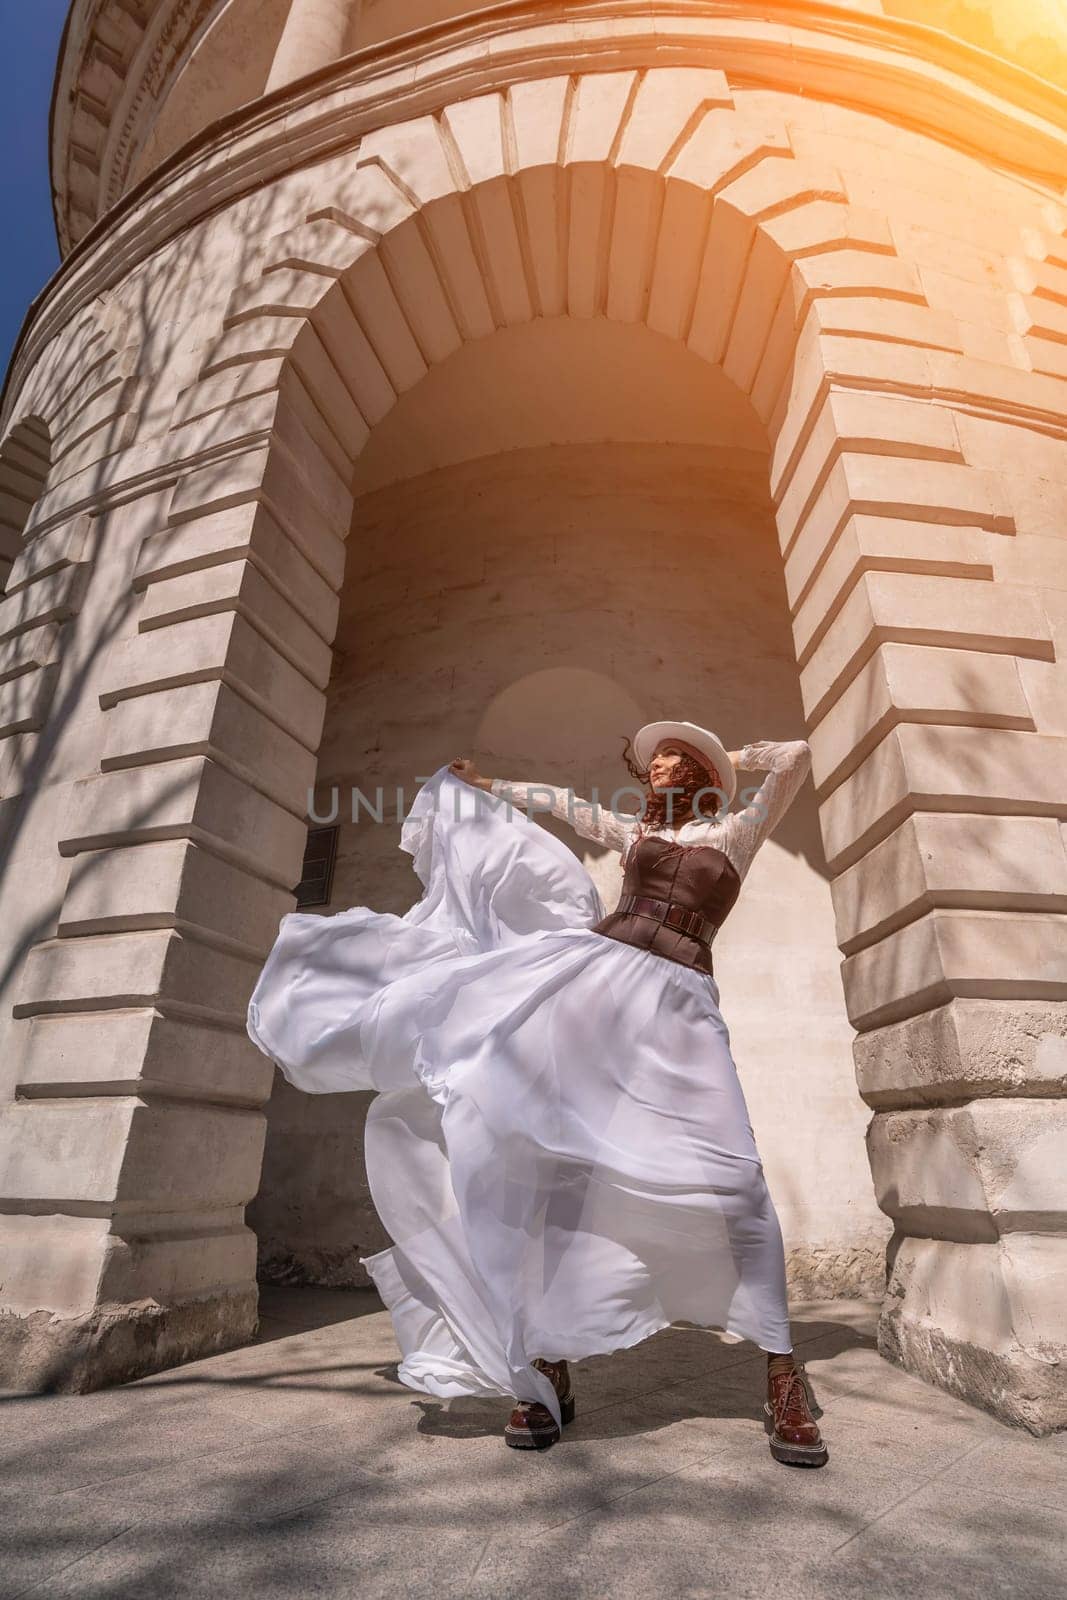 Stylish woman building city. A dancer in a long white skirt dances in front of a building with an arch. The skirt develops in the wind. by Matiunina